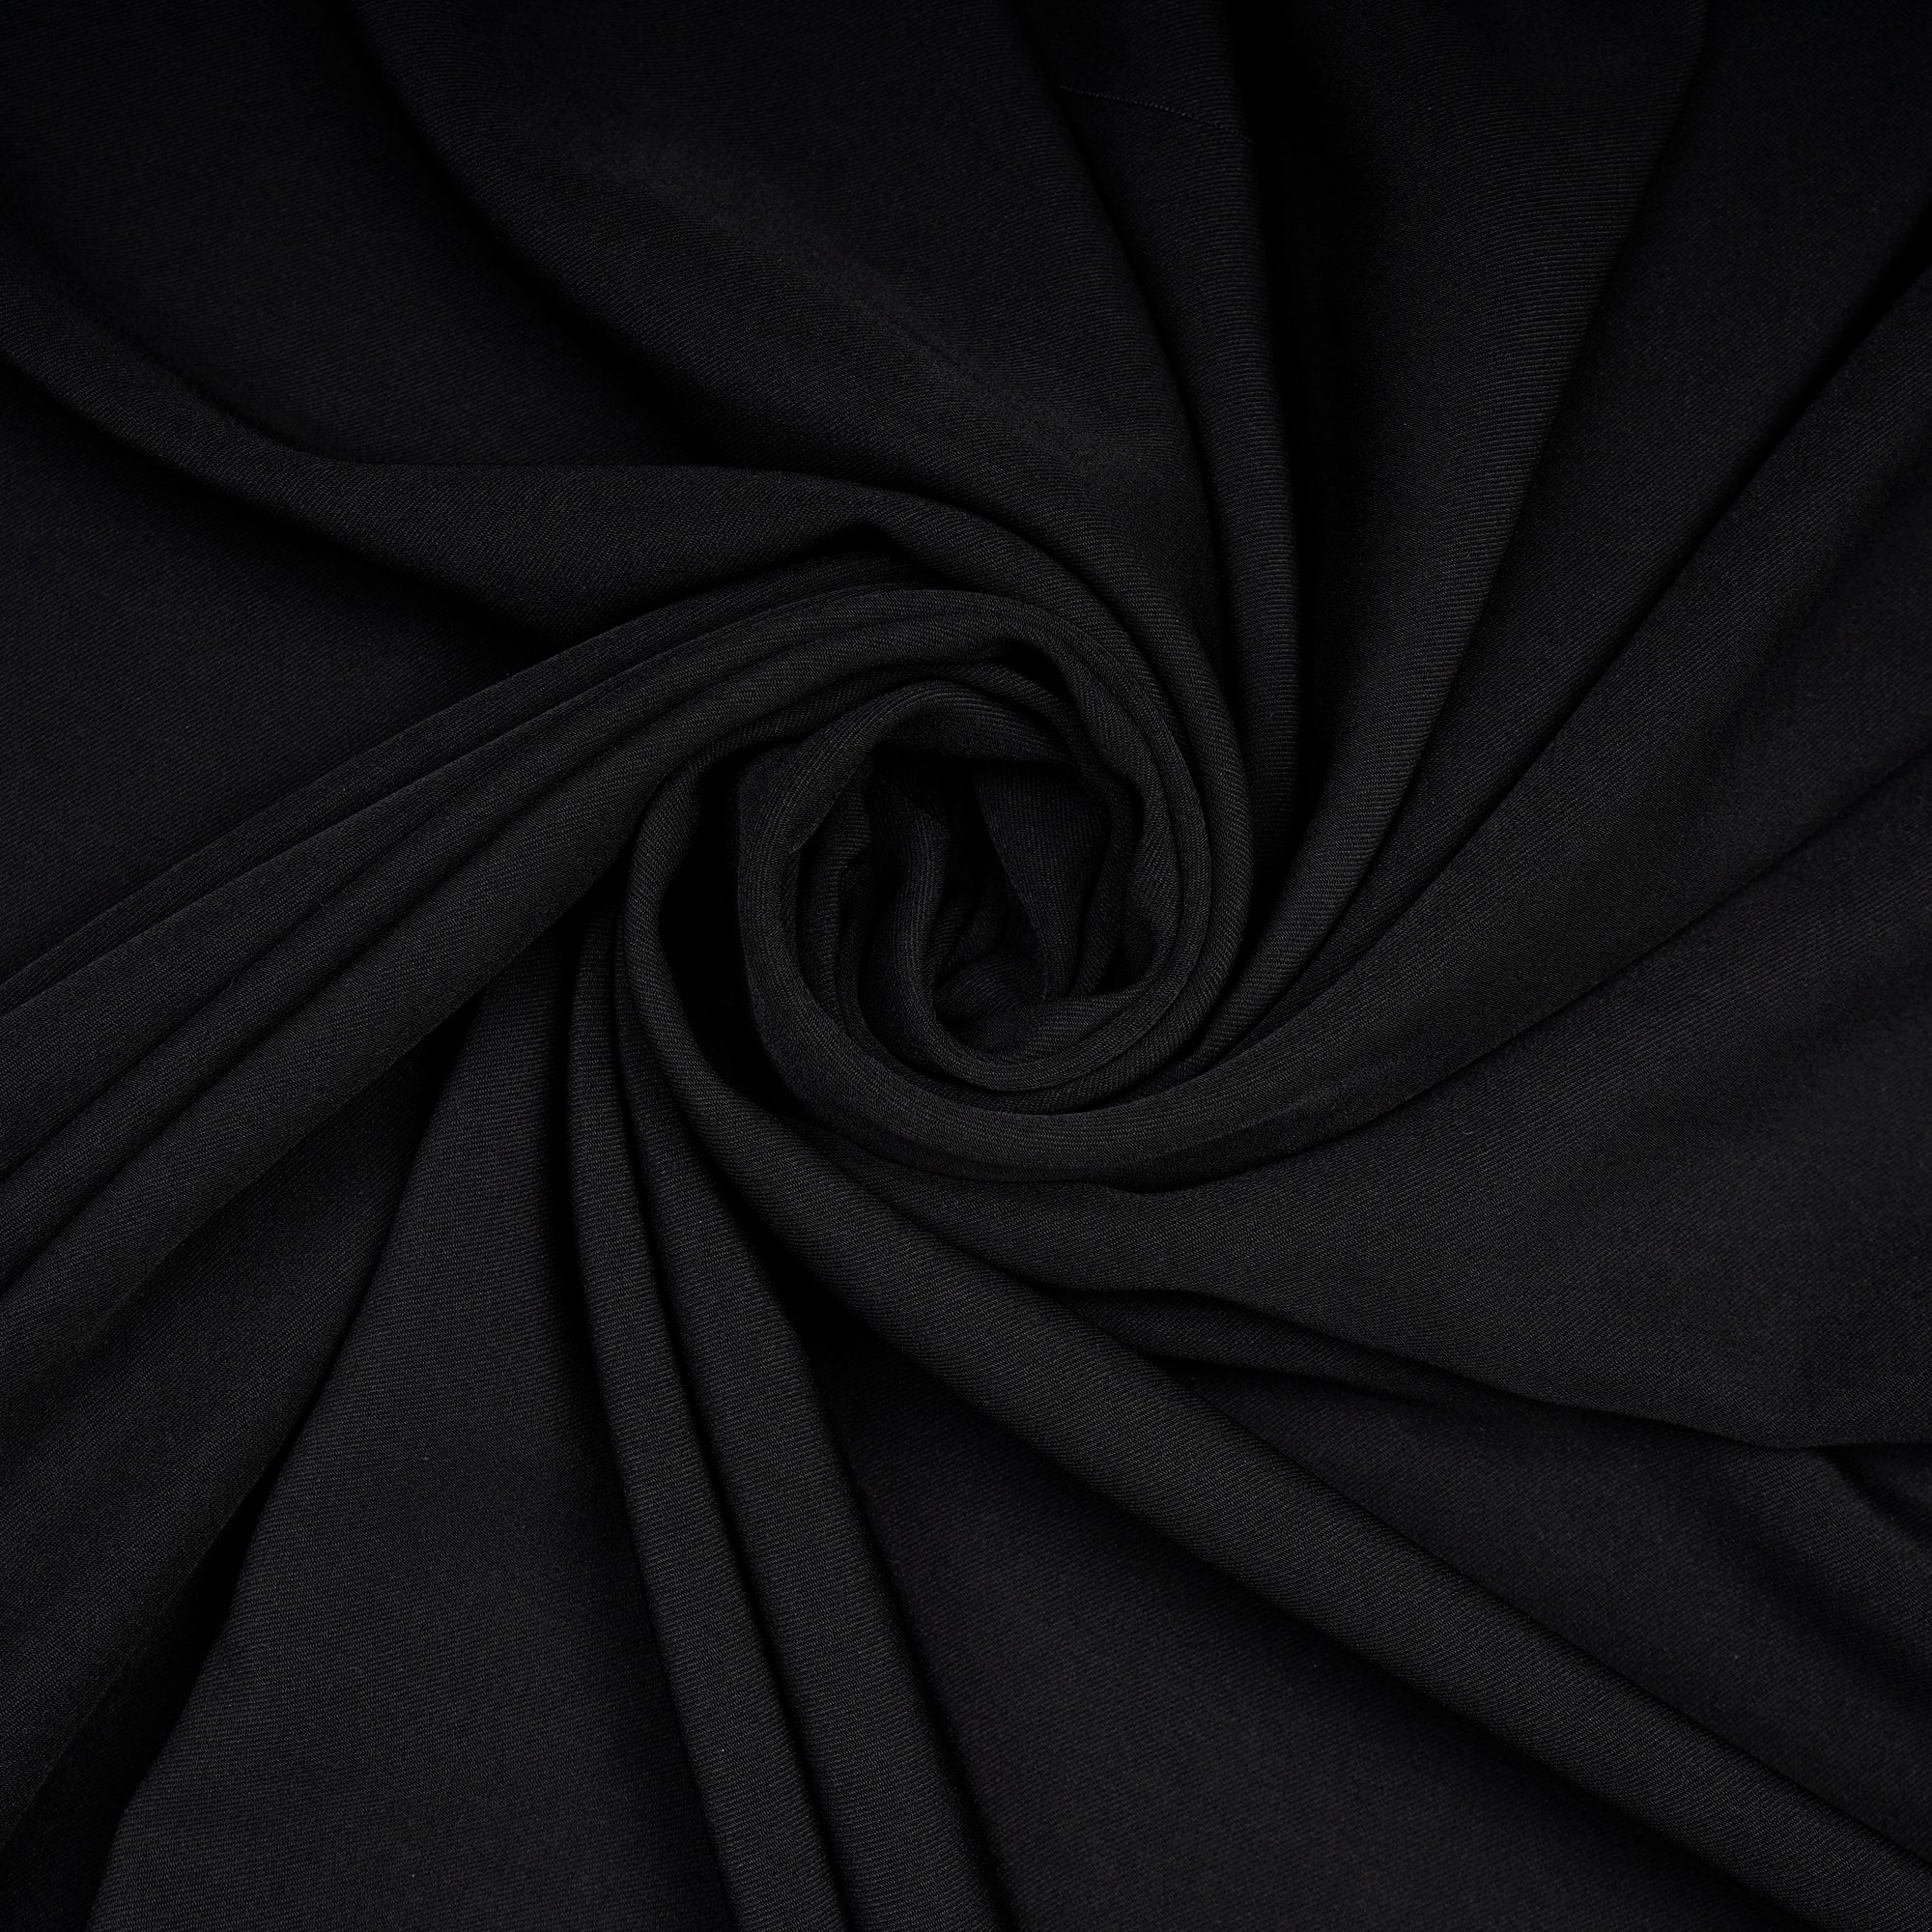 Jet Black Solid Dyed Imported British Twill Fabric (60" Width)